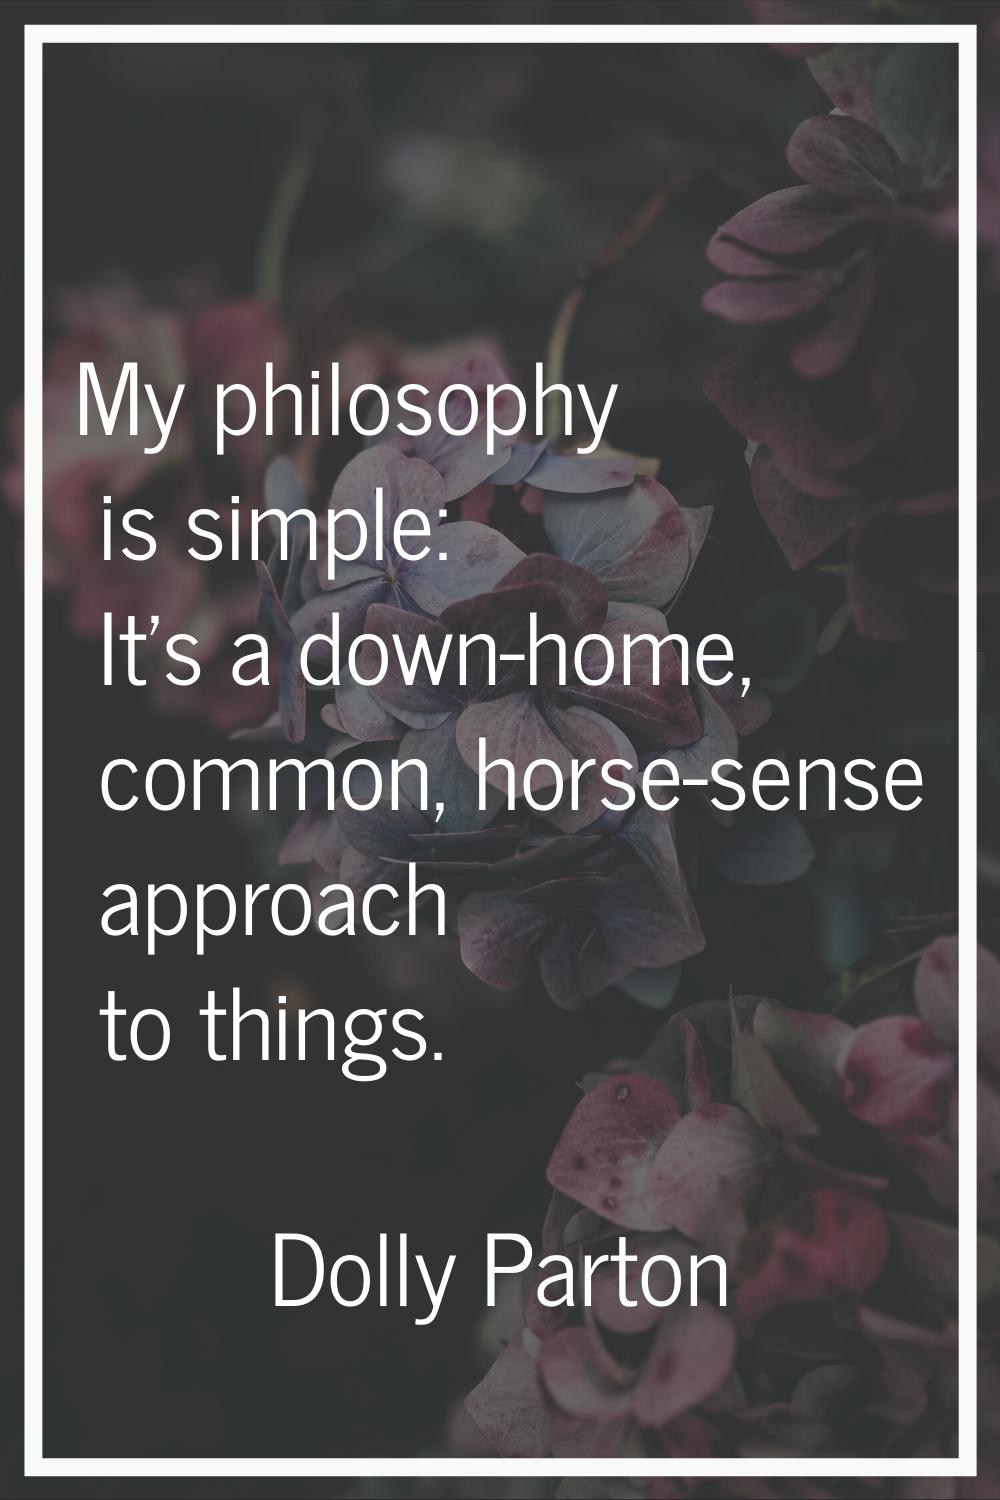 My philosophy is simple: It's a down-home, common, horse-sense approach to things.